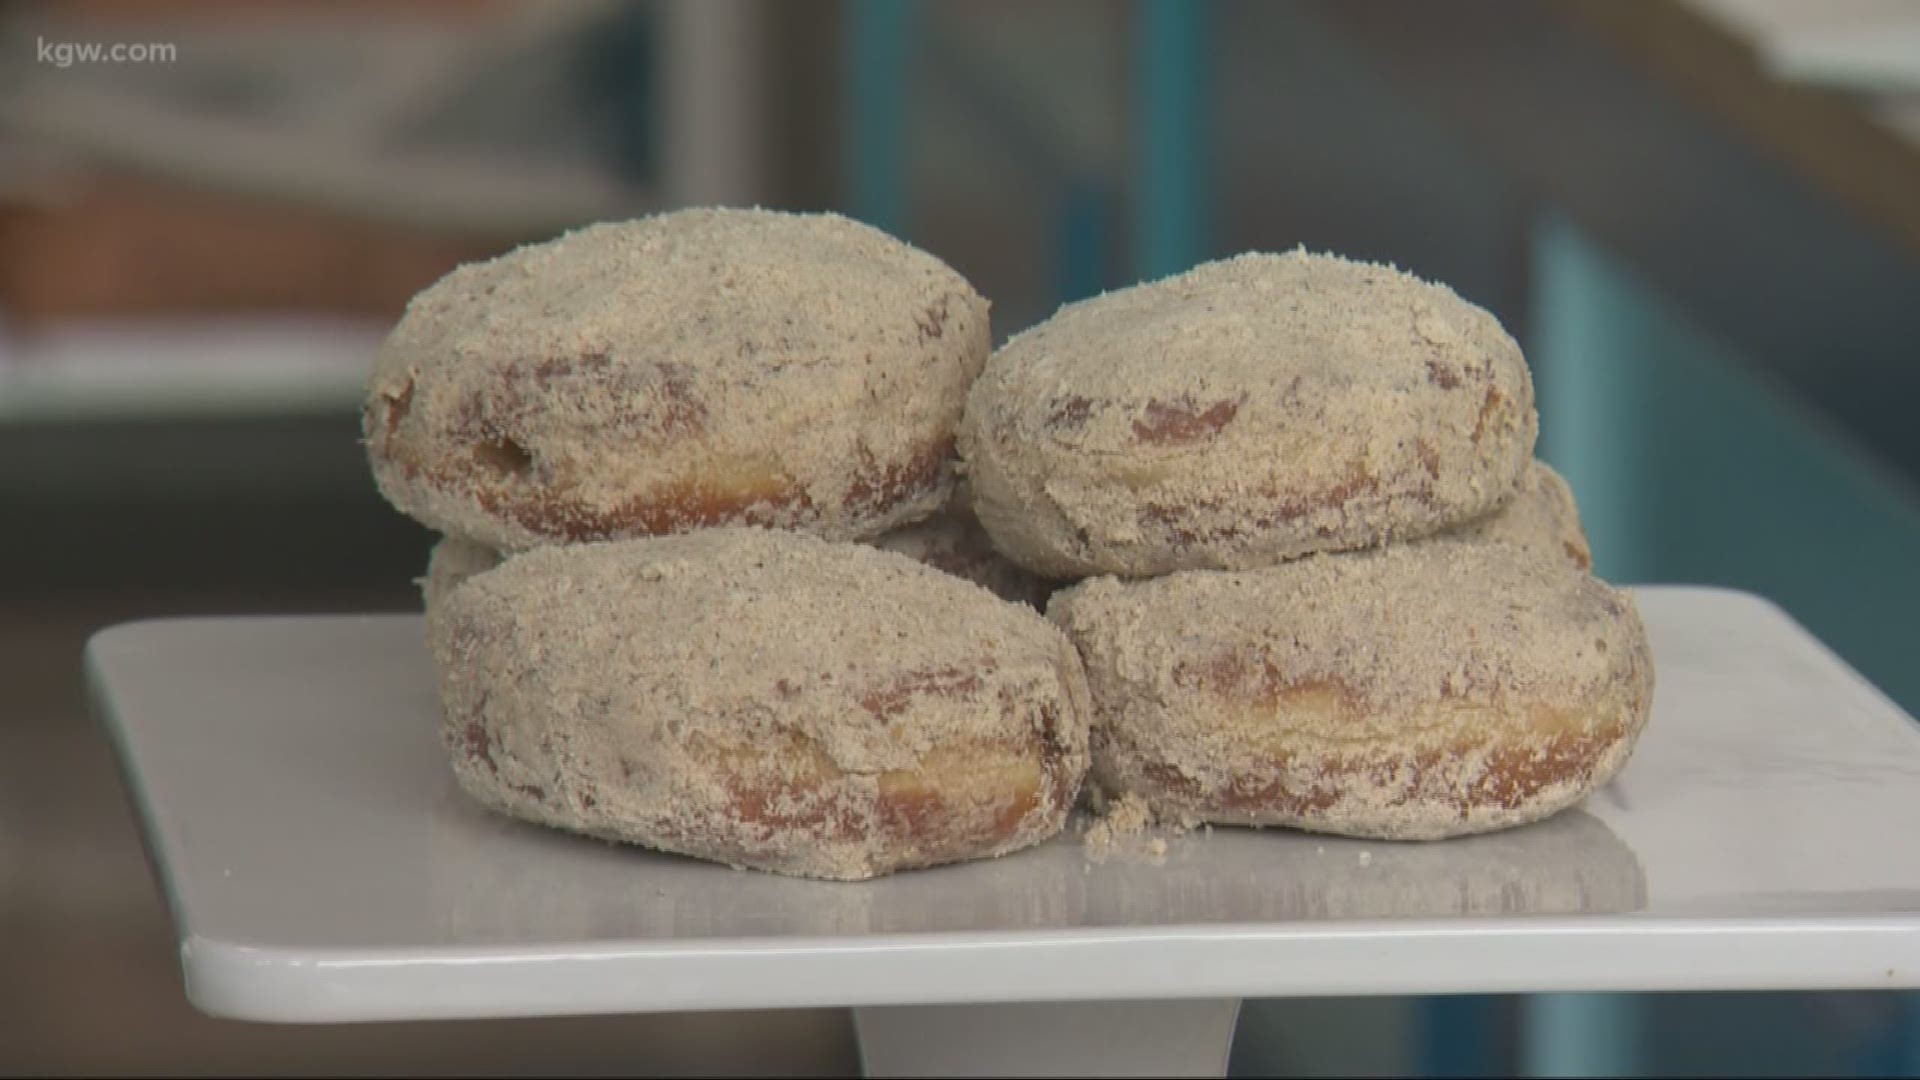 U.S. Senator Ron Wyden and Rep. Earl Blumenauer were at Blue Star donuts Monday when the company introduced a hemp-derived, CBD-infused donut. They are strong supporters of hemp production.